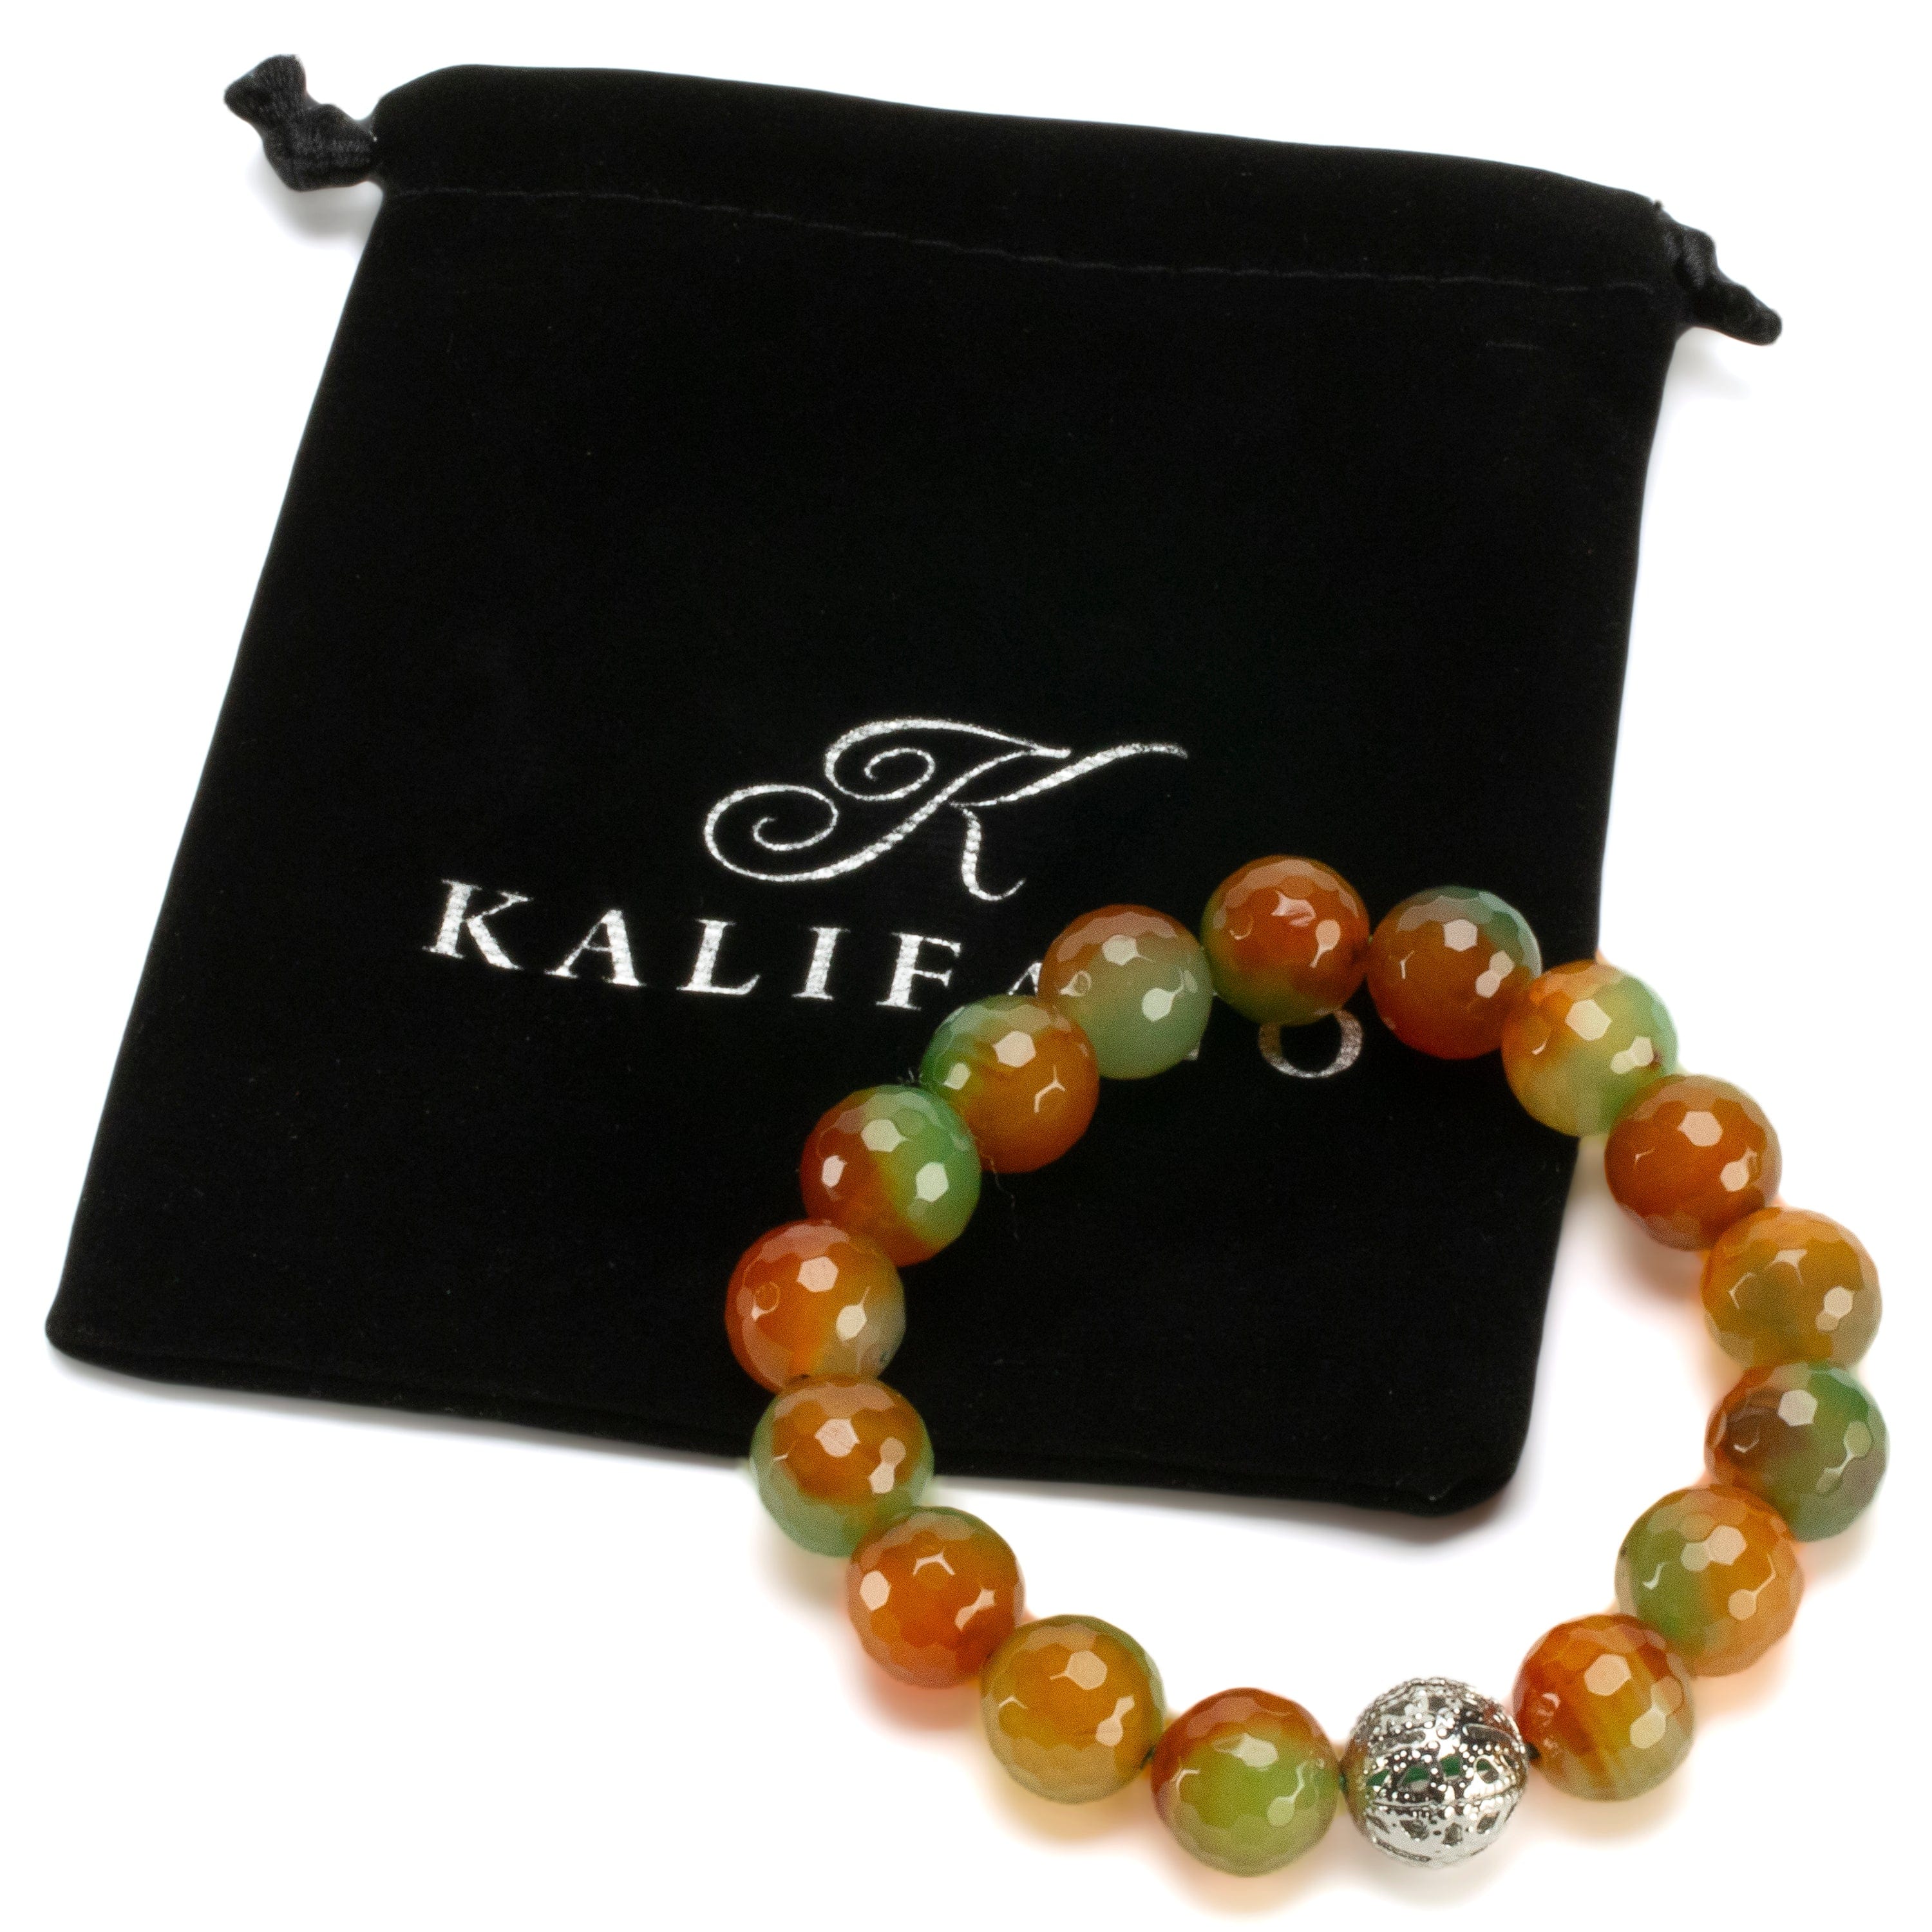 Kalifano Gemstone Bracelets Faceted Agate 12mm Gemstone Bead Elastic Bracelet with Silver Accent Bead GOLD-BGP-079